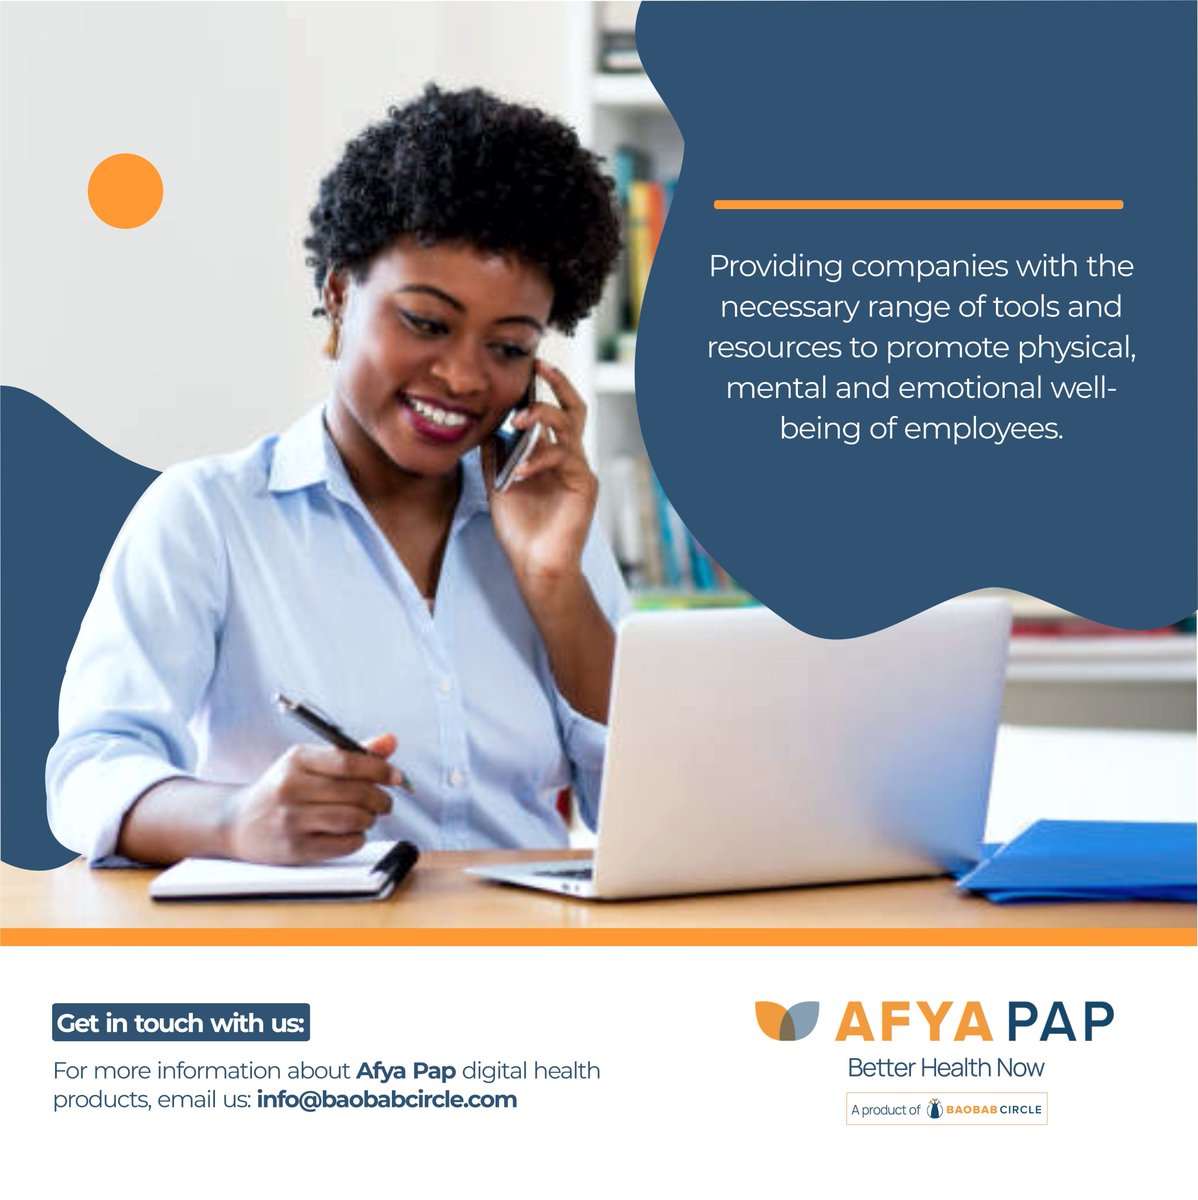 Providing companies with the necessary range of tools and resources to promote physical, mental and emotional well-being of employees. 

#AfyaPap #DigitalWellnessSolution #TelemedicinePlatform #DigitalCommunityHealthWork #RemotePatientMonitoring